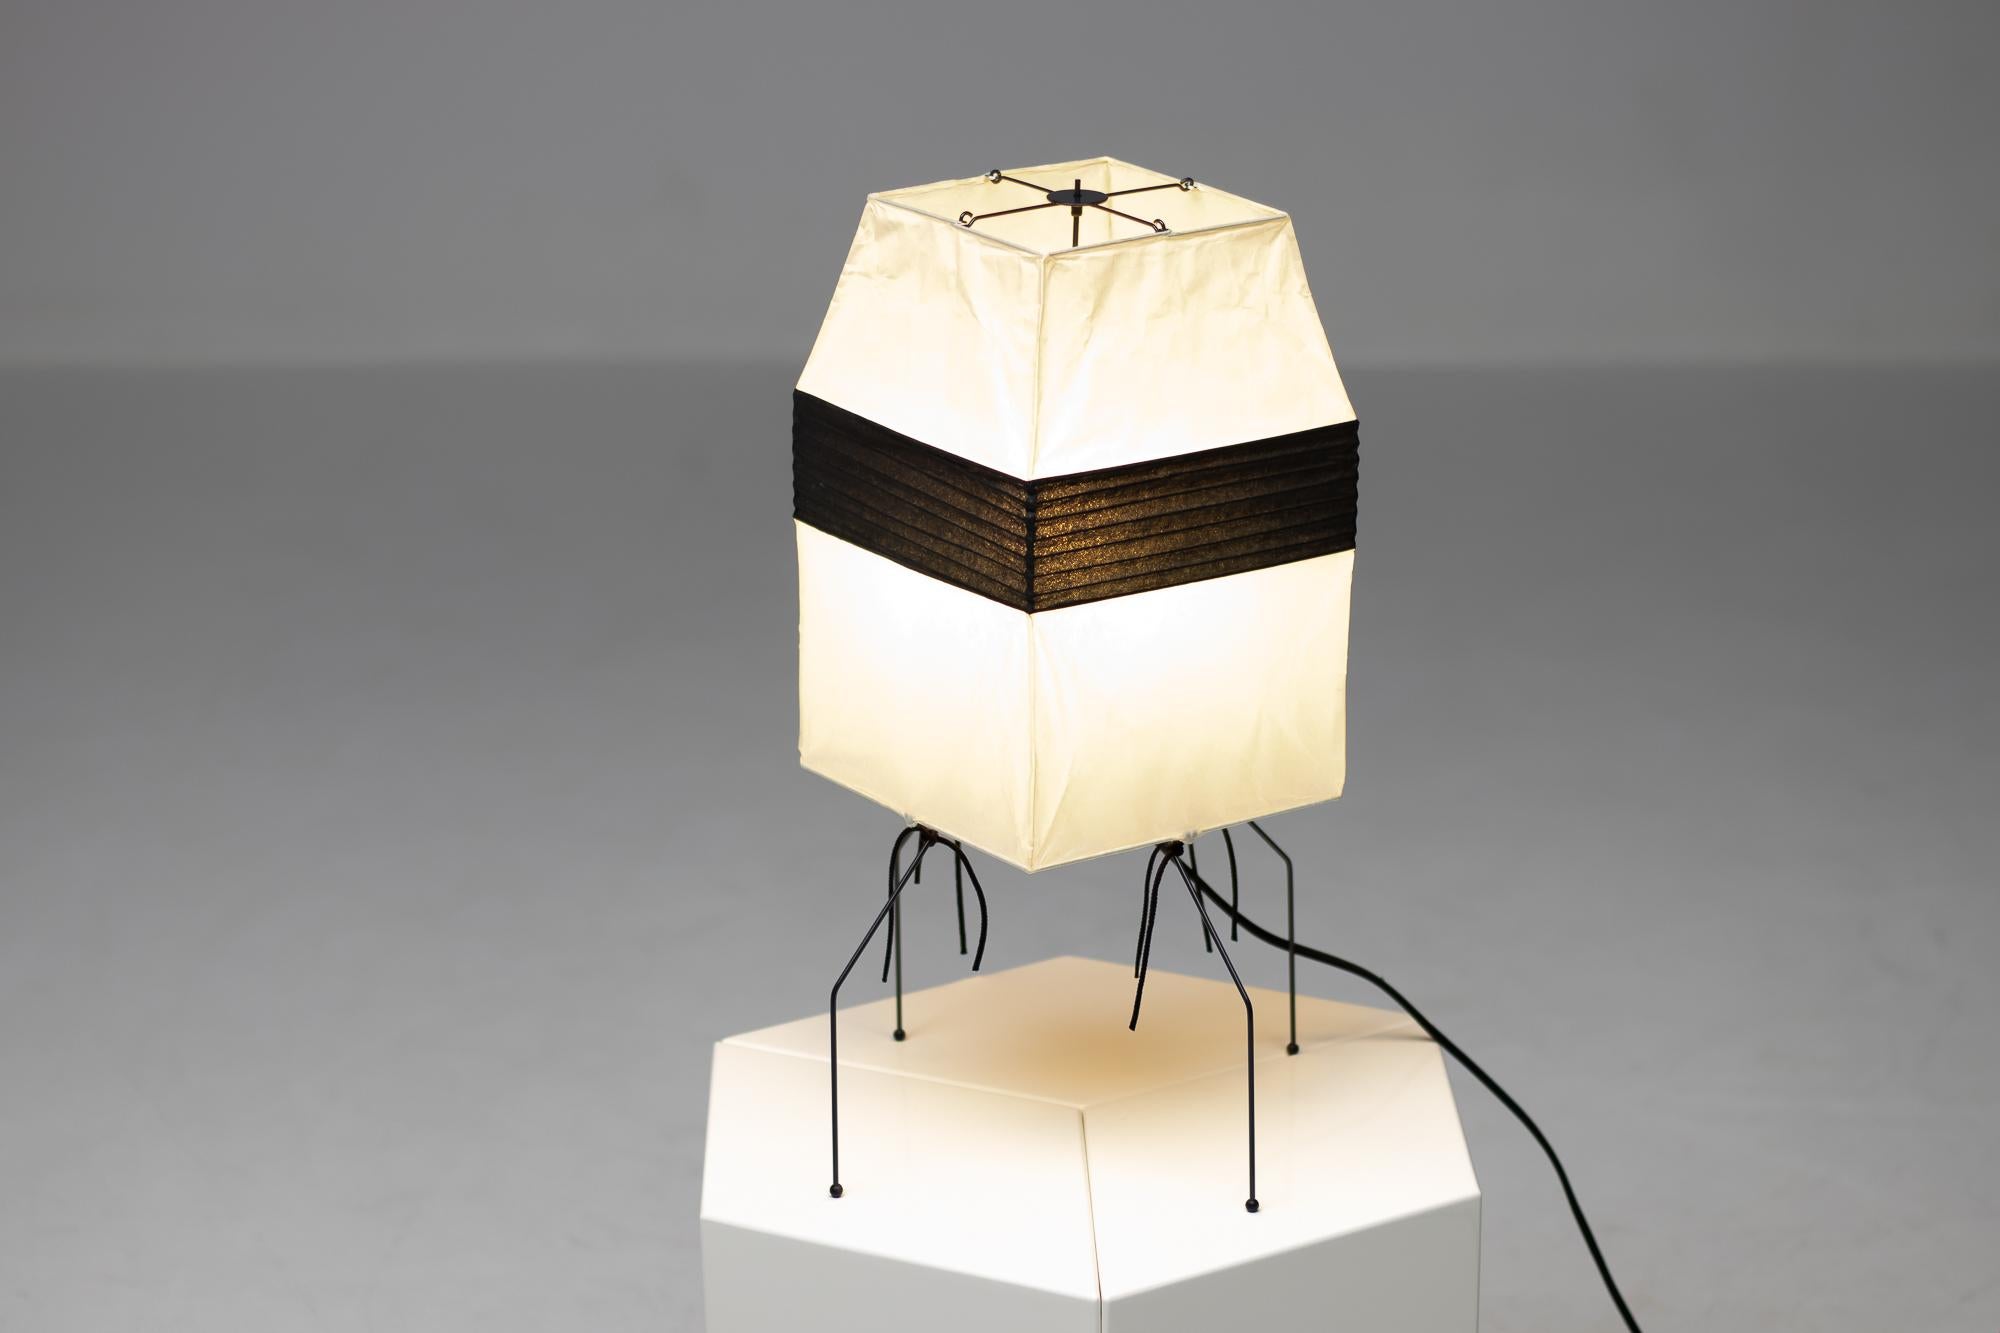 Model number UF 1-H table lamp in black and white by Isamu Noguchi for Akari. Designed and manufactured in Japan. 
Rice paper, enameled metal. All original excellent condition. Retains manufacturer's original stamp. 
With the original box.
Takes